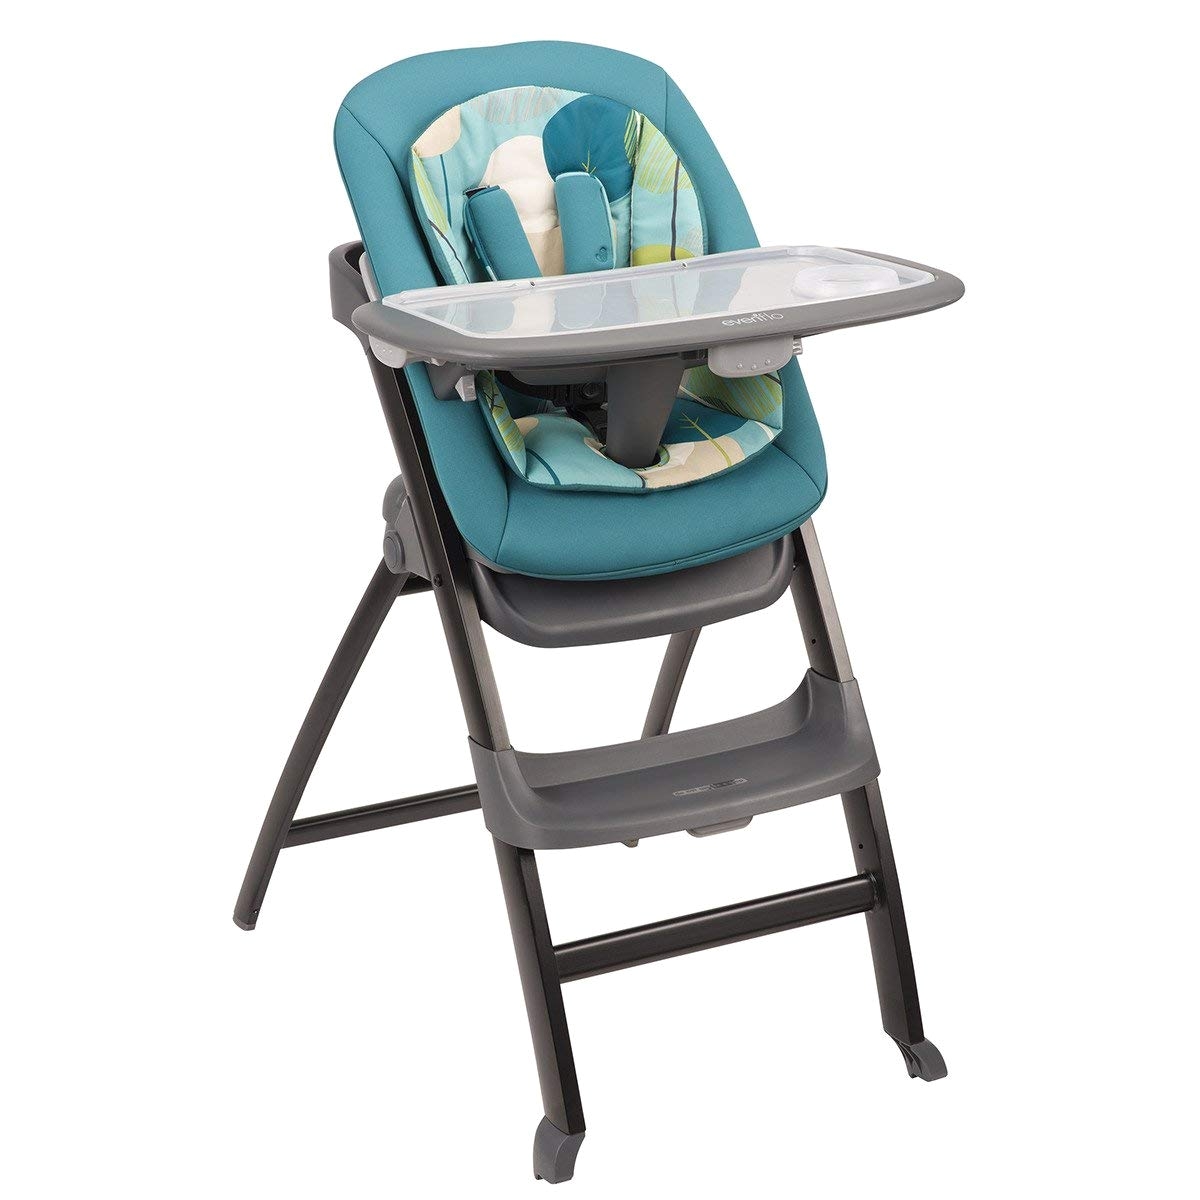 Fisher Price 4 In 1 Highchair Canada evenflo Quatore 4 In 1 High Chair Deep Lake Teal Amazon Ca Baby